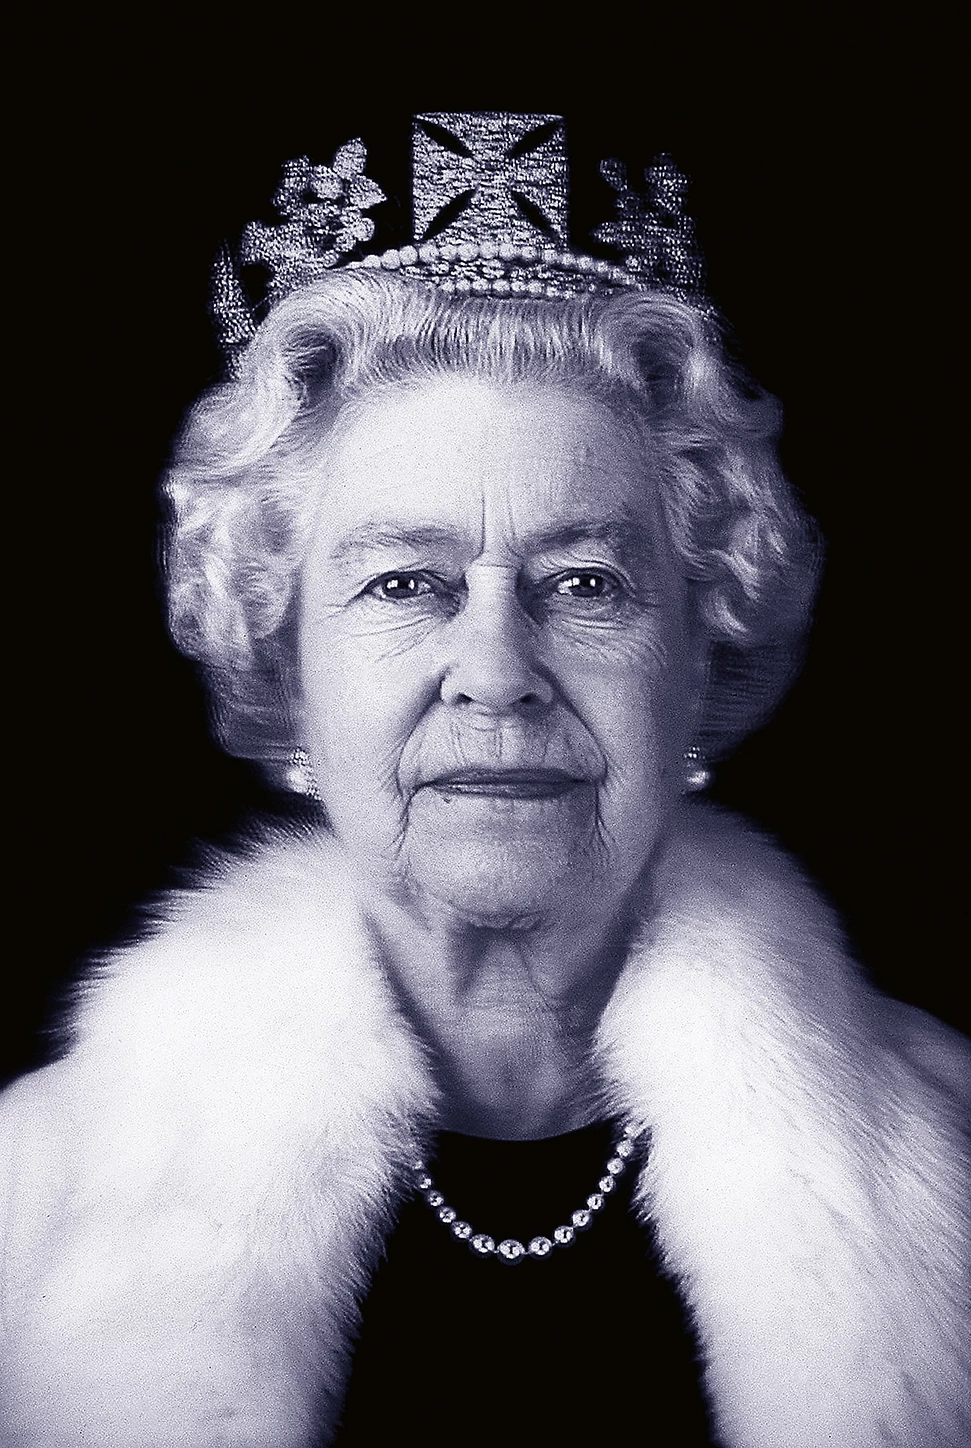 Platinum Jubilee: Discover the most iconic images of The Queen through the years 4. Queen Elizabeth II Portrait by Chris Levine Rob Munday